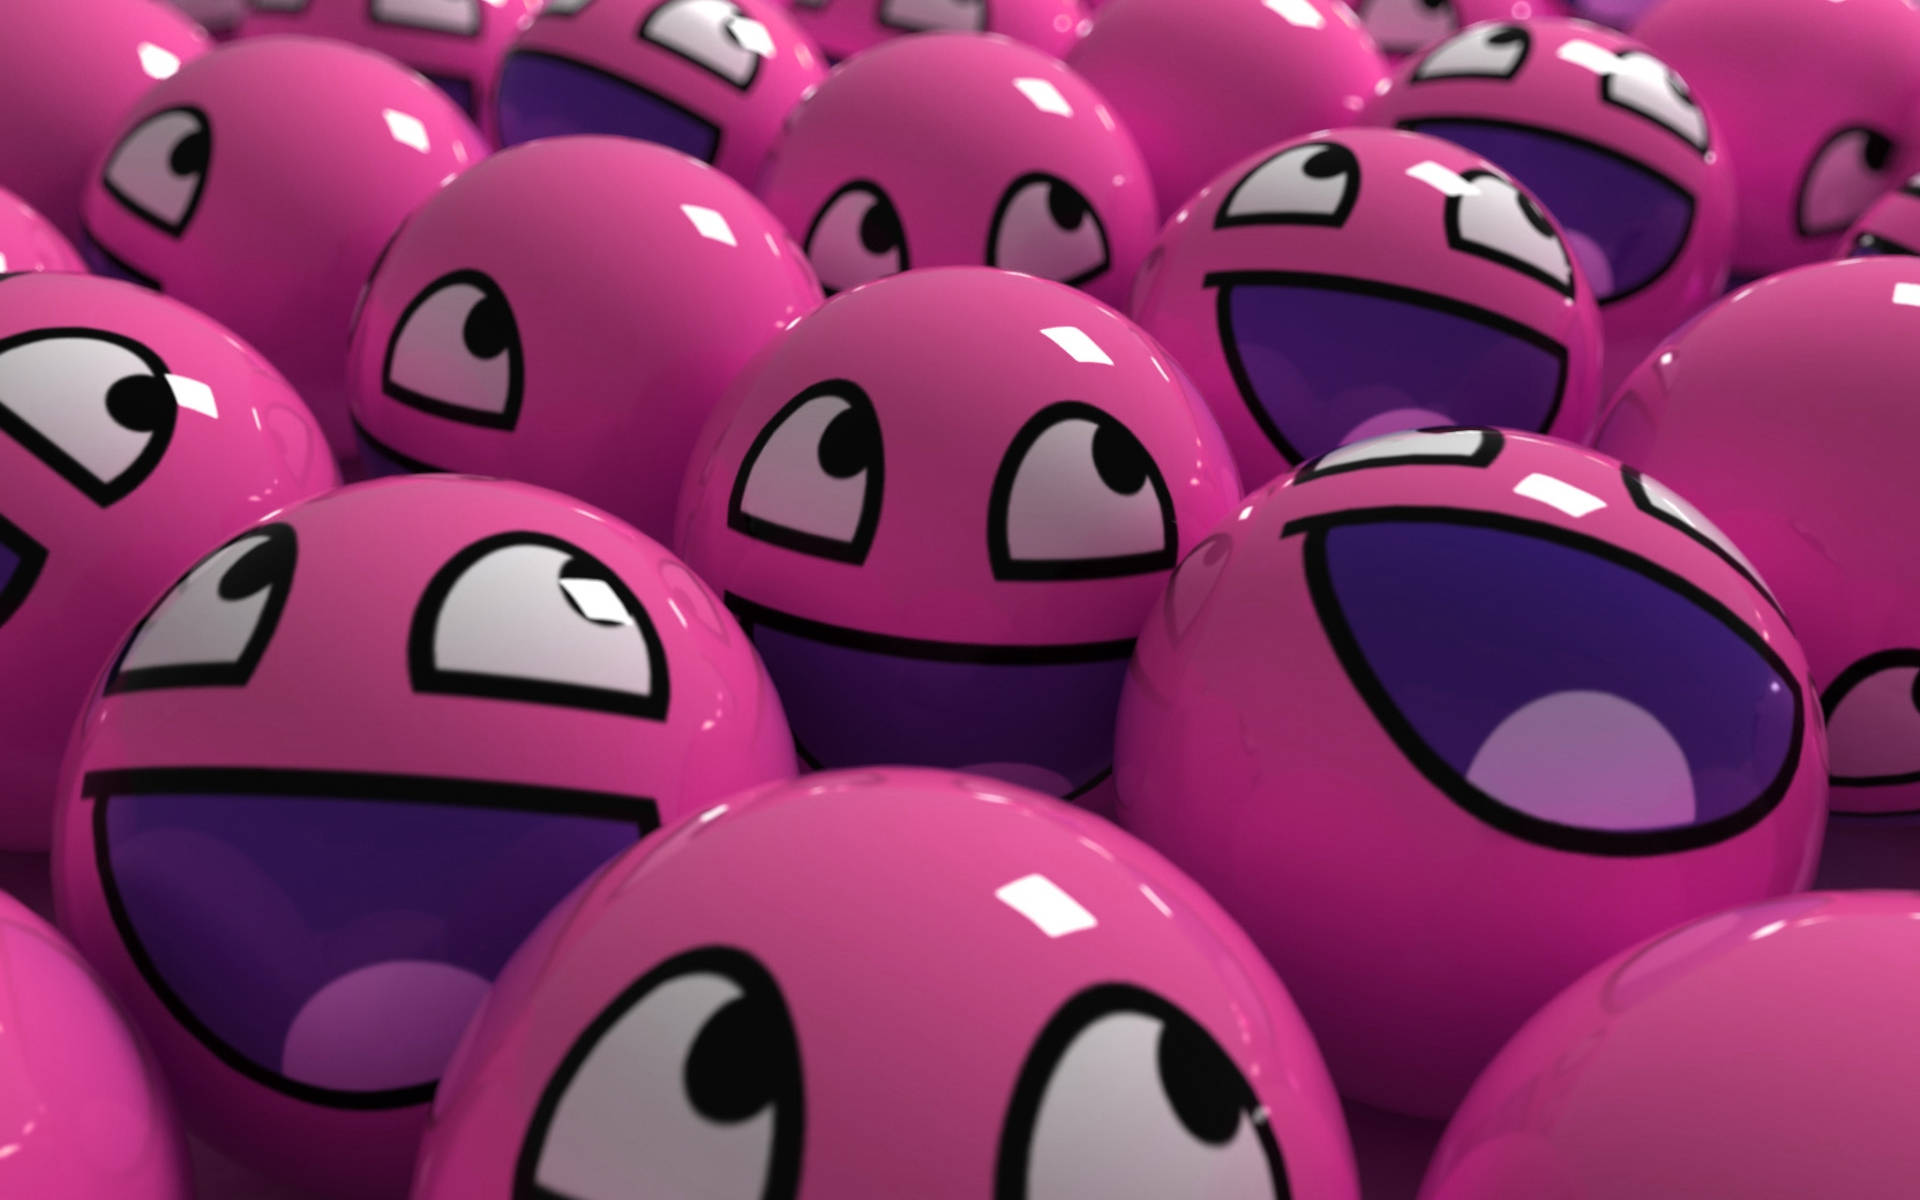 Cute And Pink Balls Smiling Faces